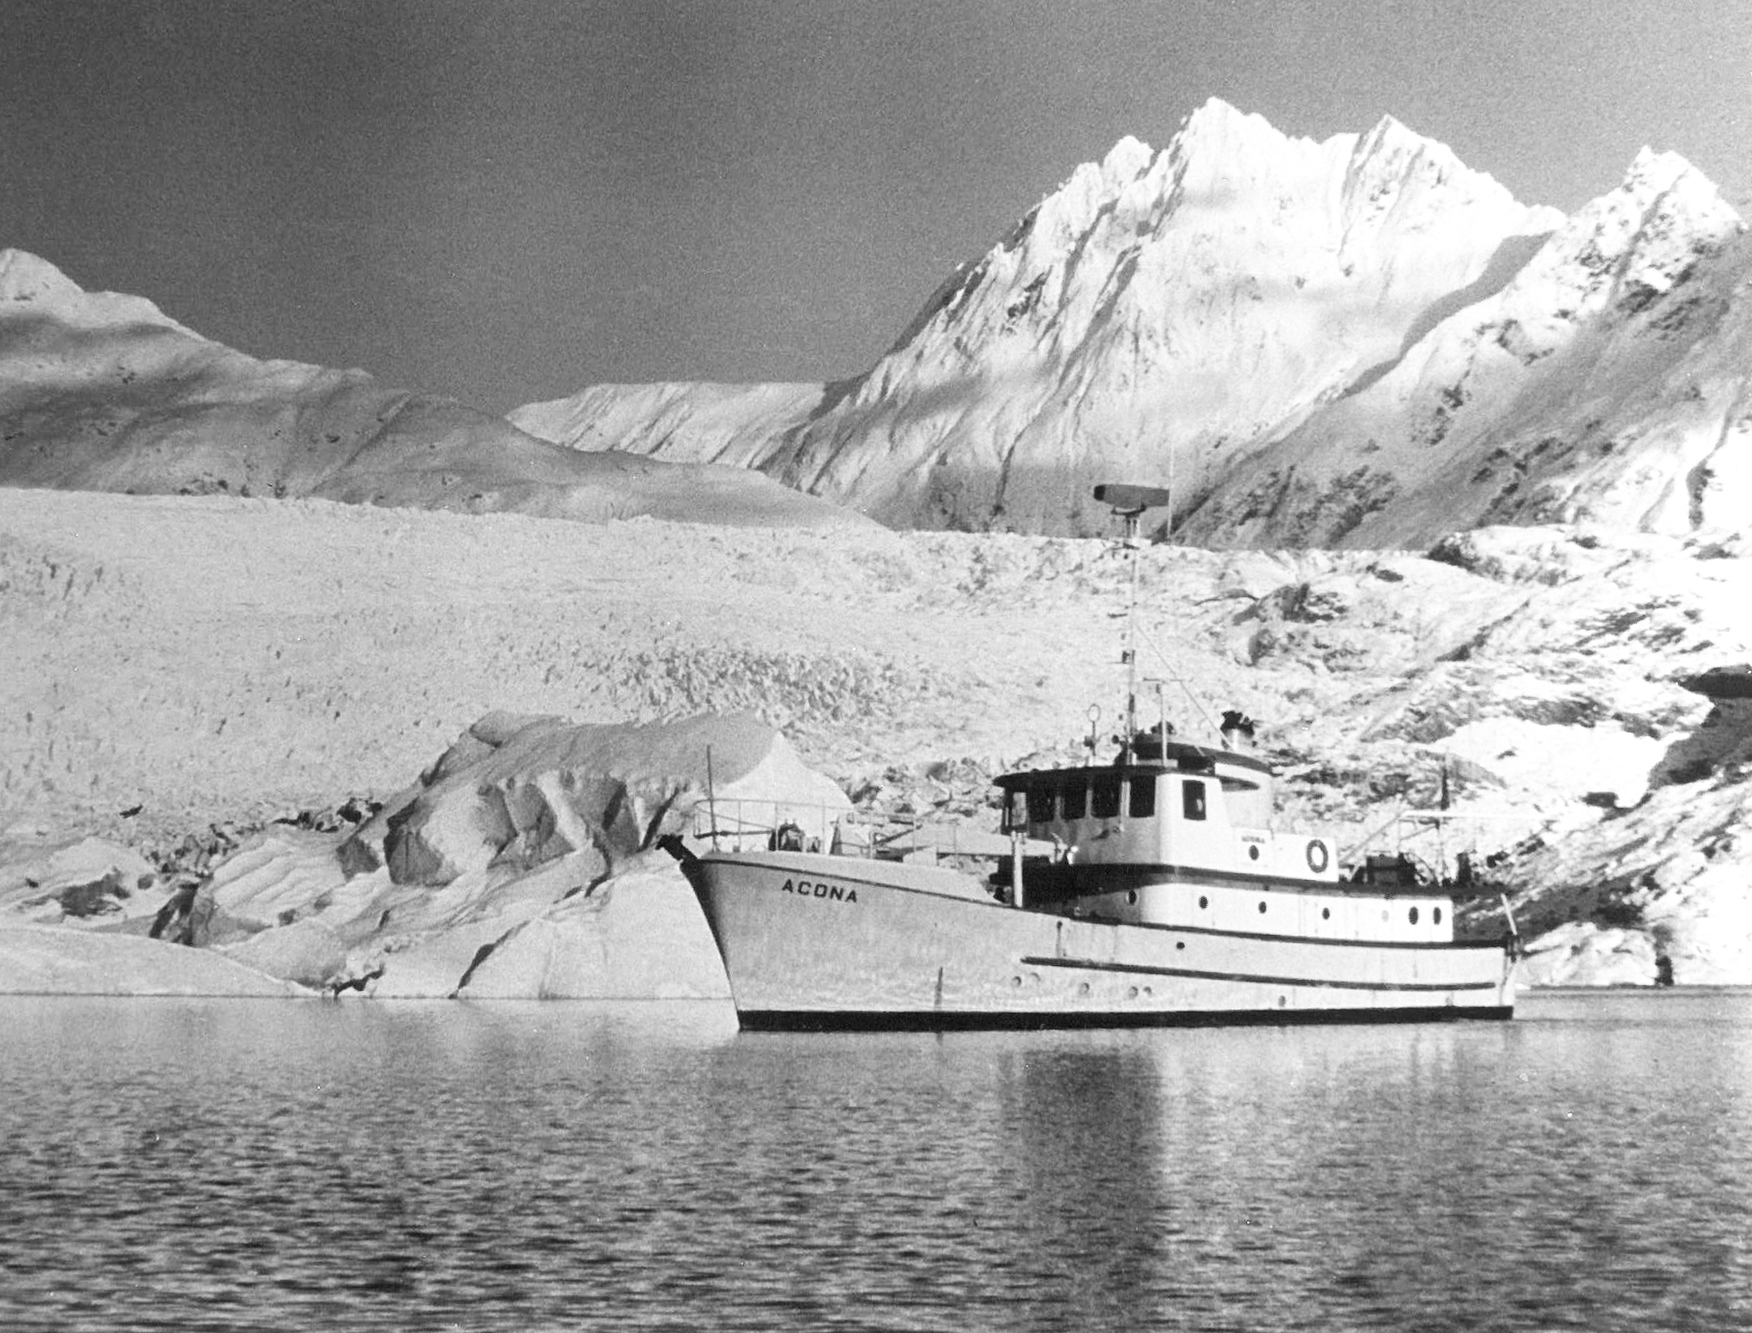 Photo courtesy of the Seward Marine Center. Acona, the first research ship homeported at SMC, pauses near a glacier. Acona was moved to Seward from Douglas, Alaska, in 1970.